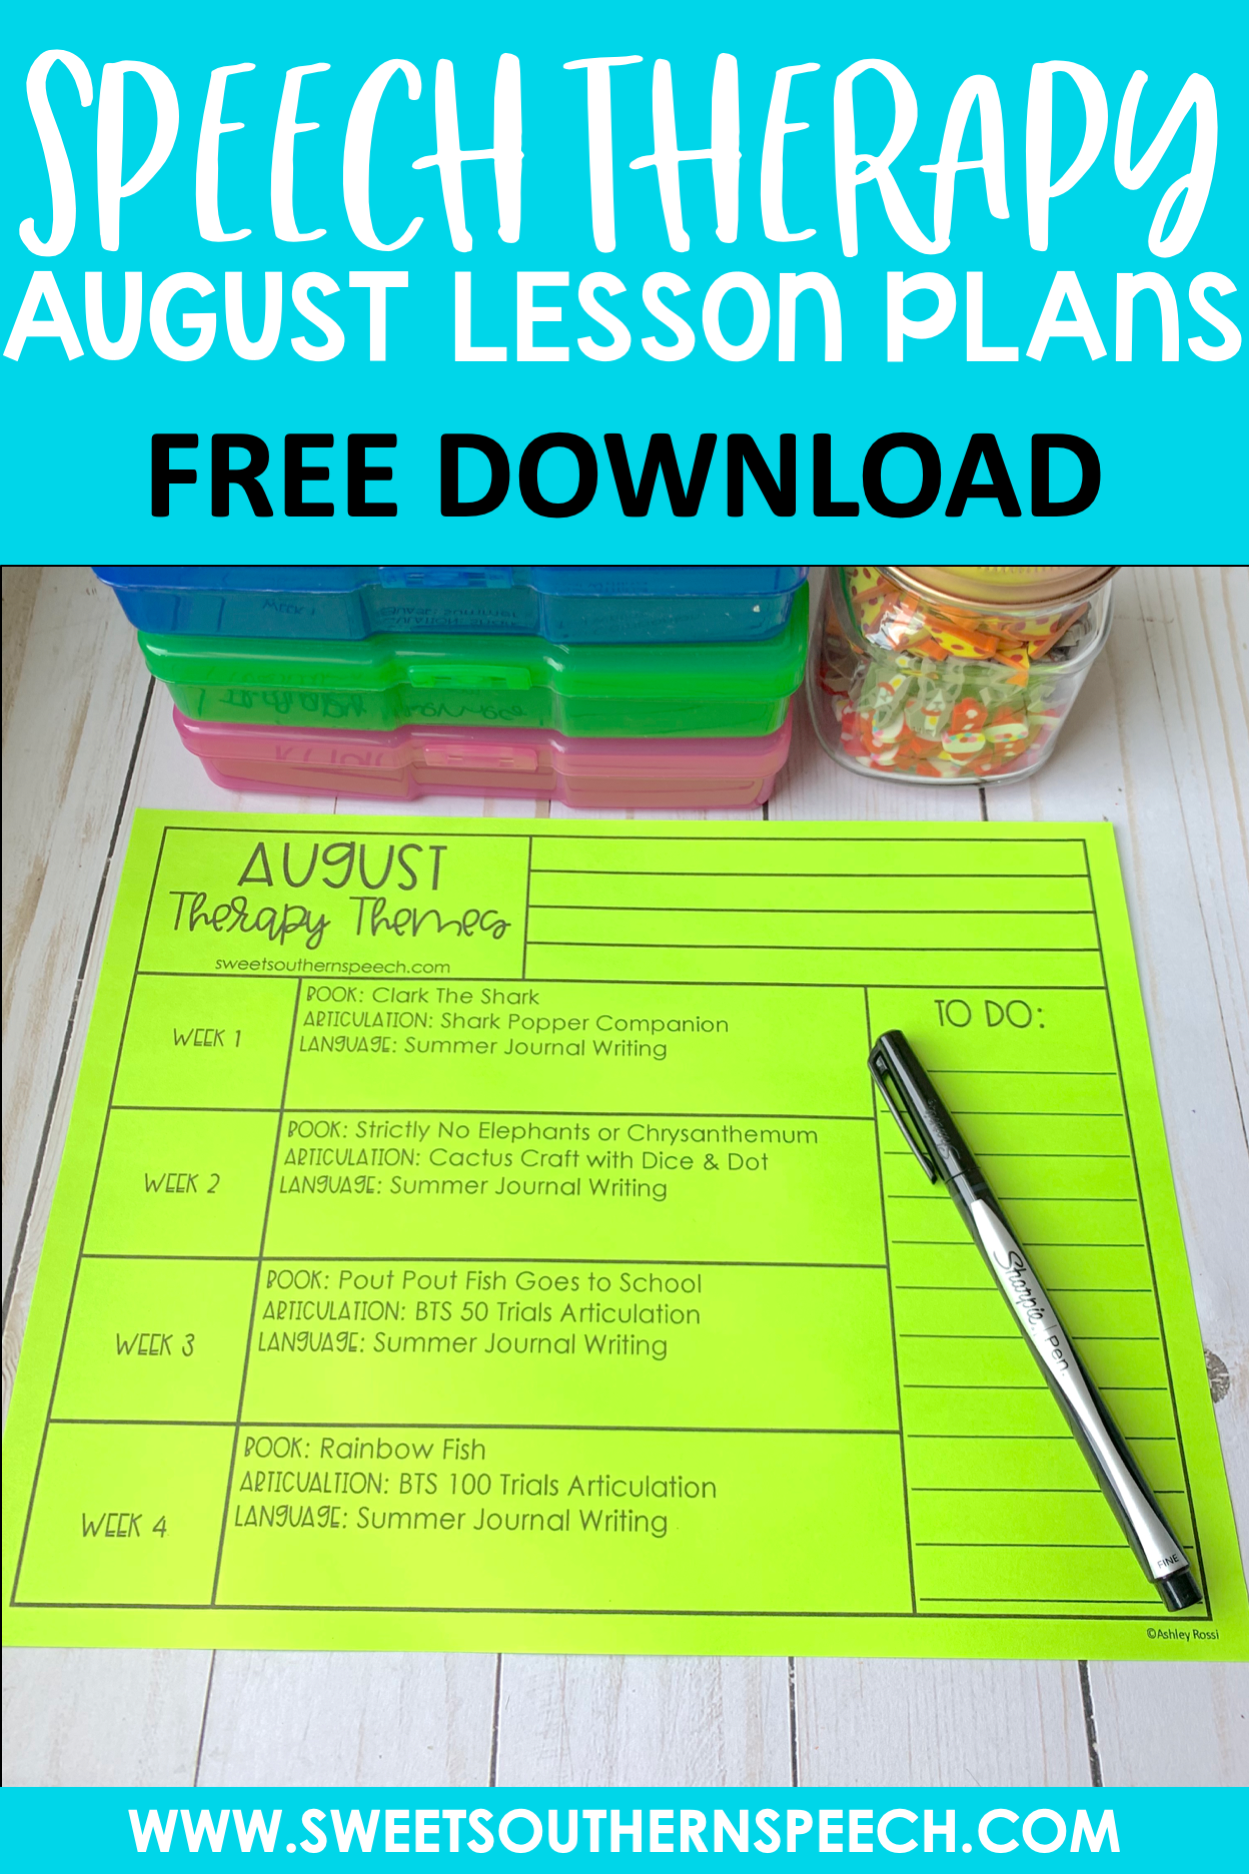 August Speech Therapy Lesson Plans